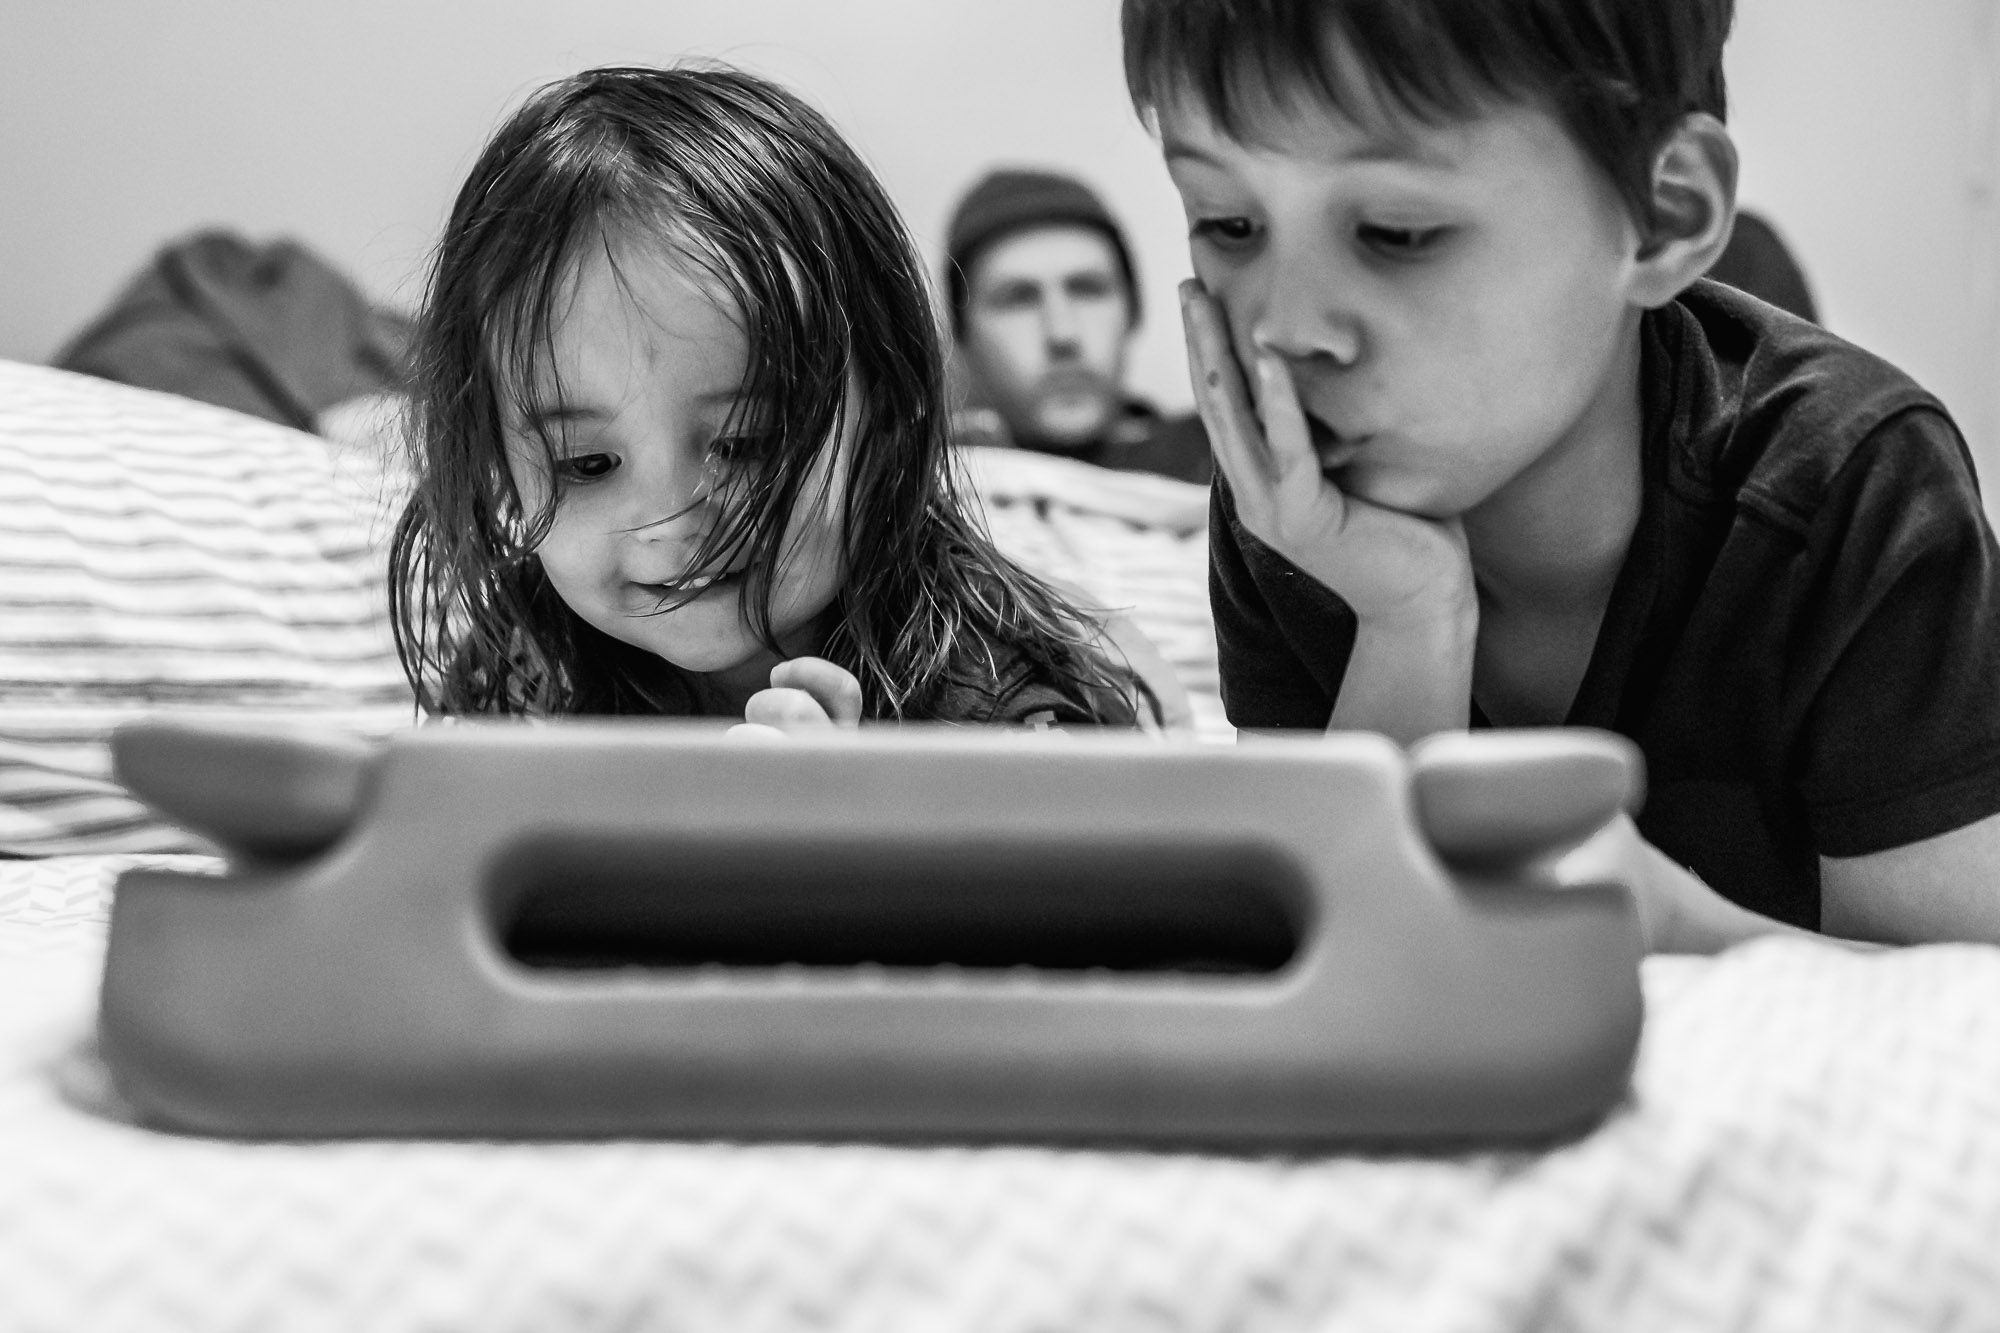 Children playing on tablet with dad in background